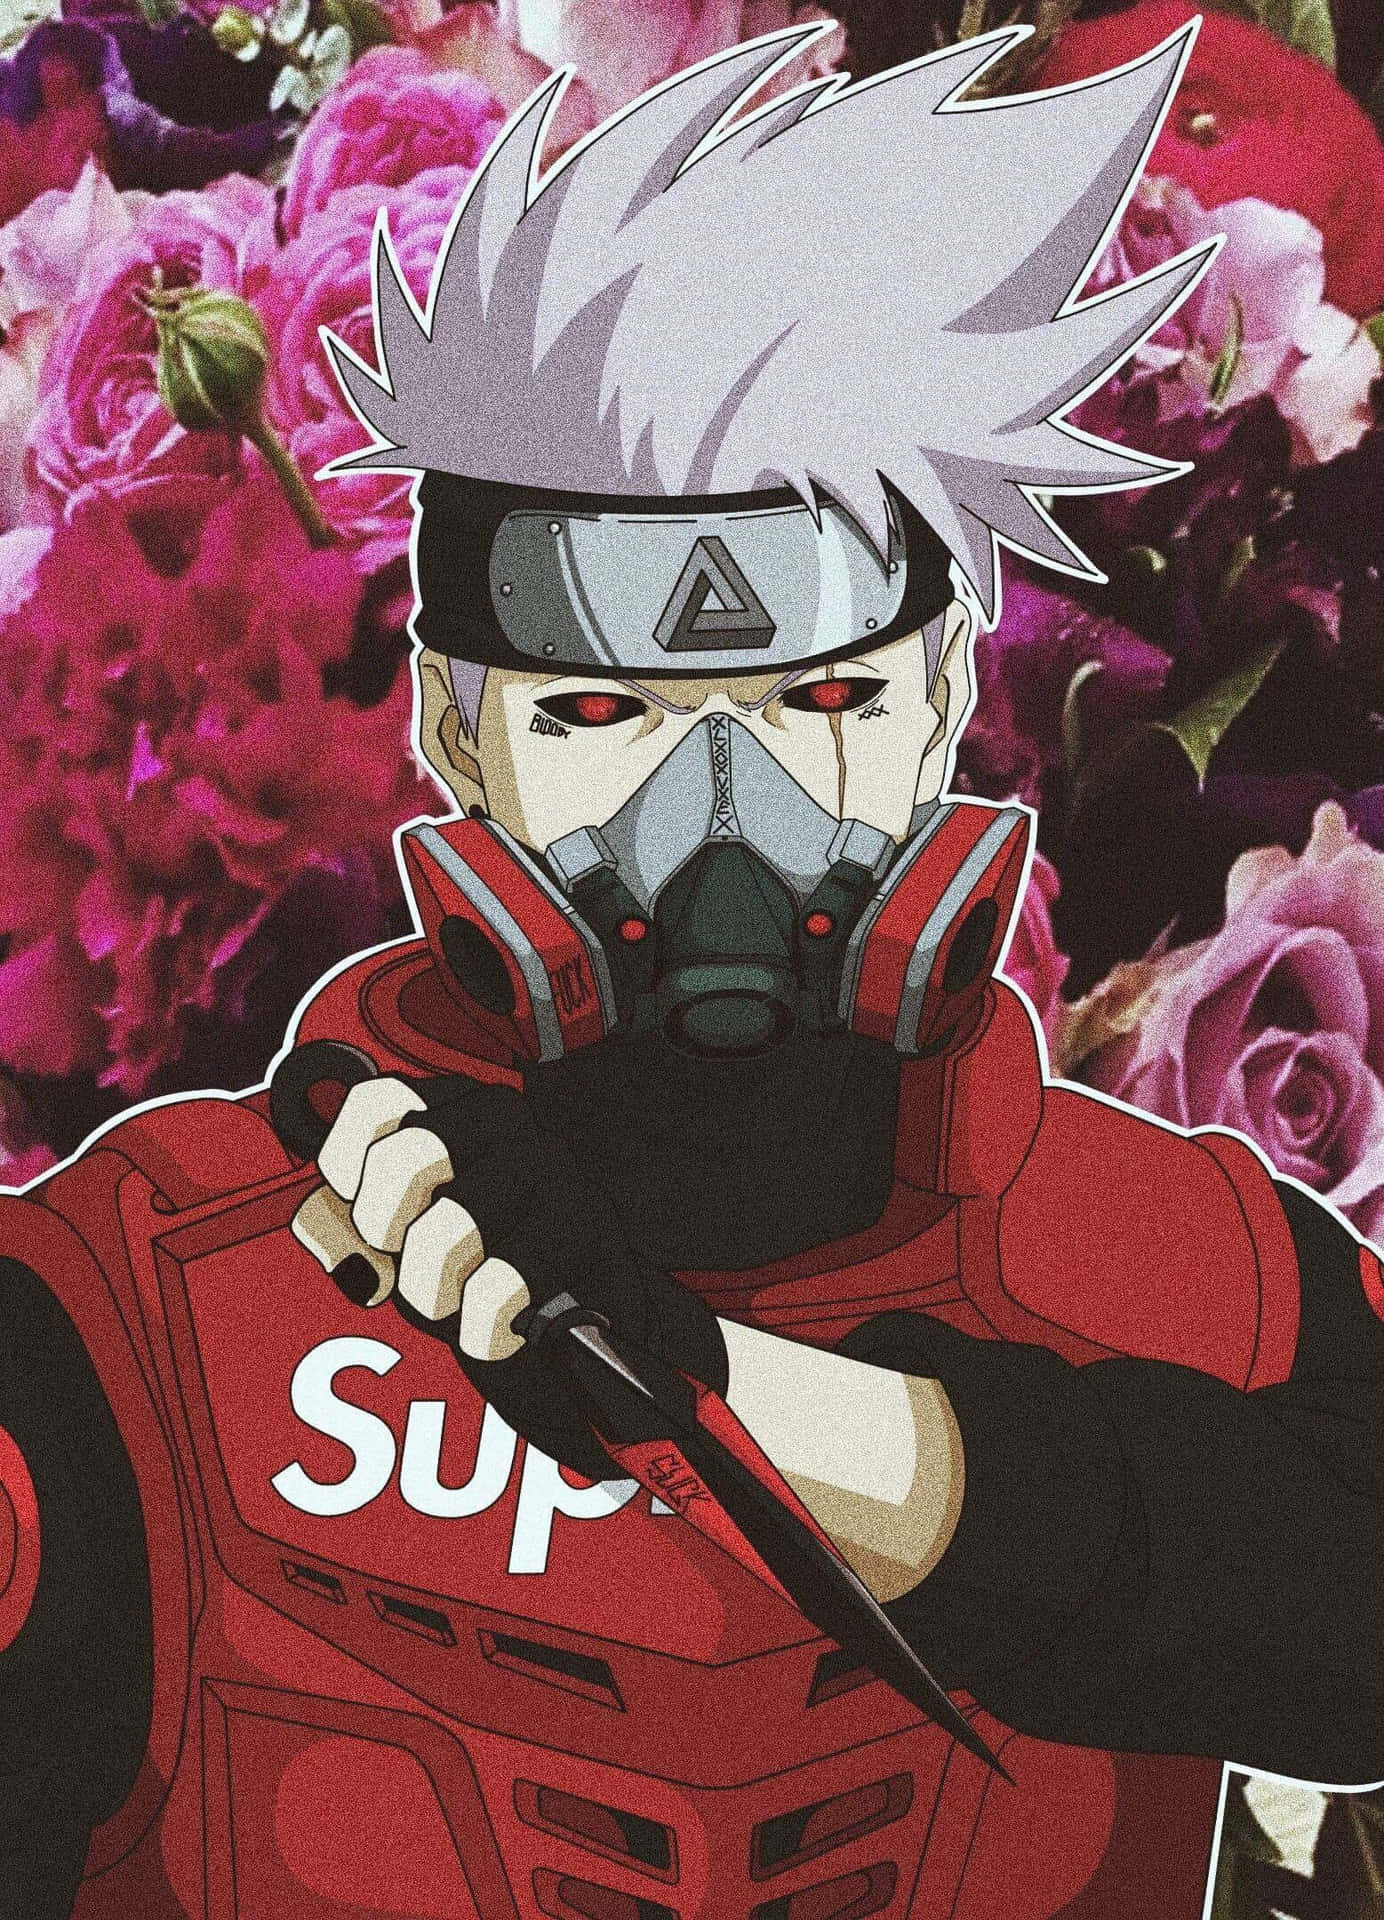 "Catch me in the latest streetwear: Supreme on Anime Characters" Wallpaper